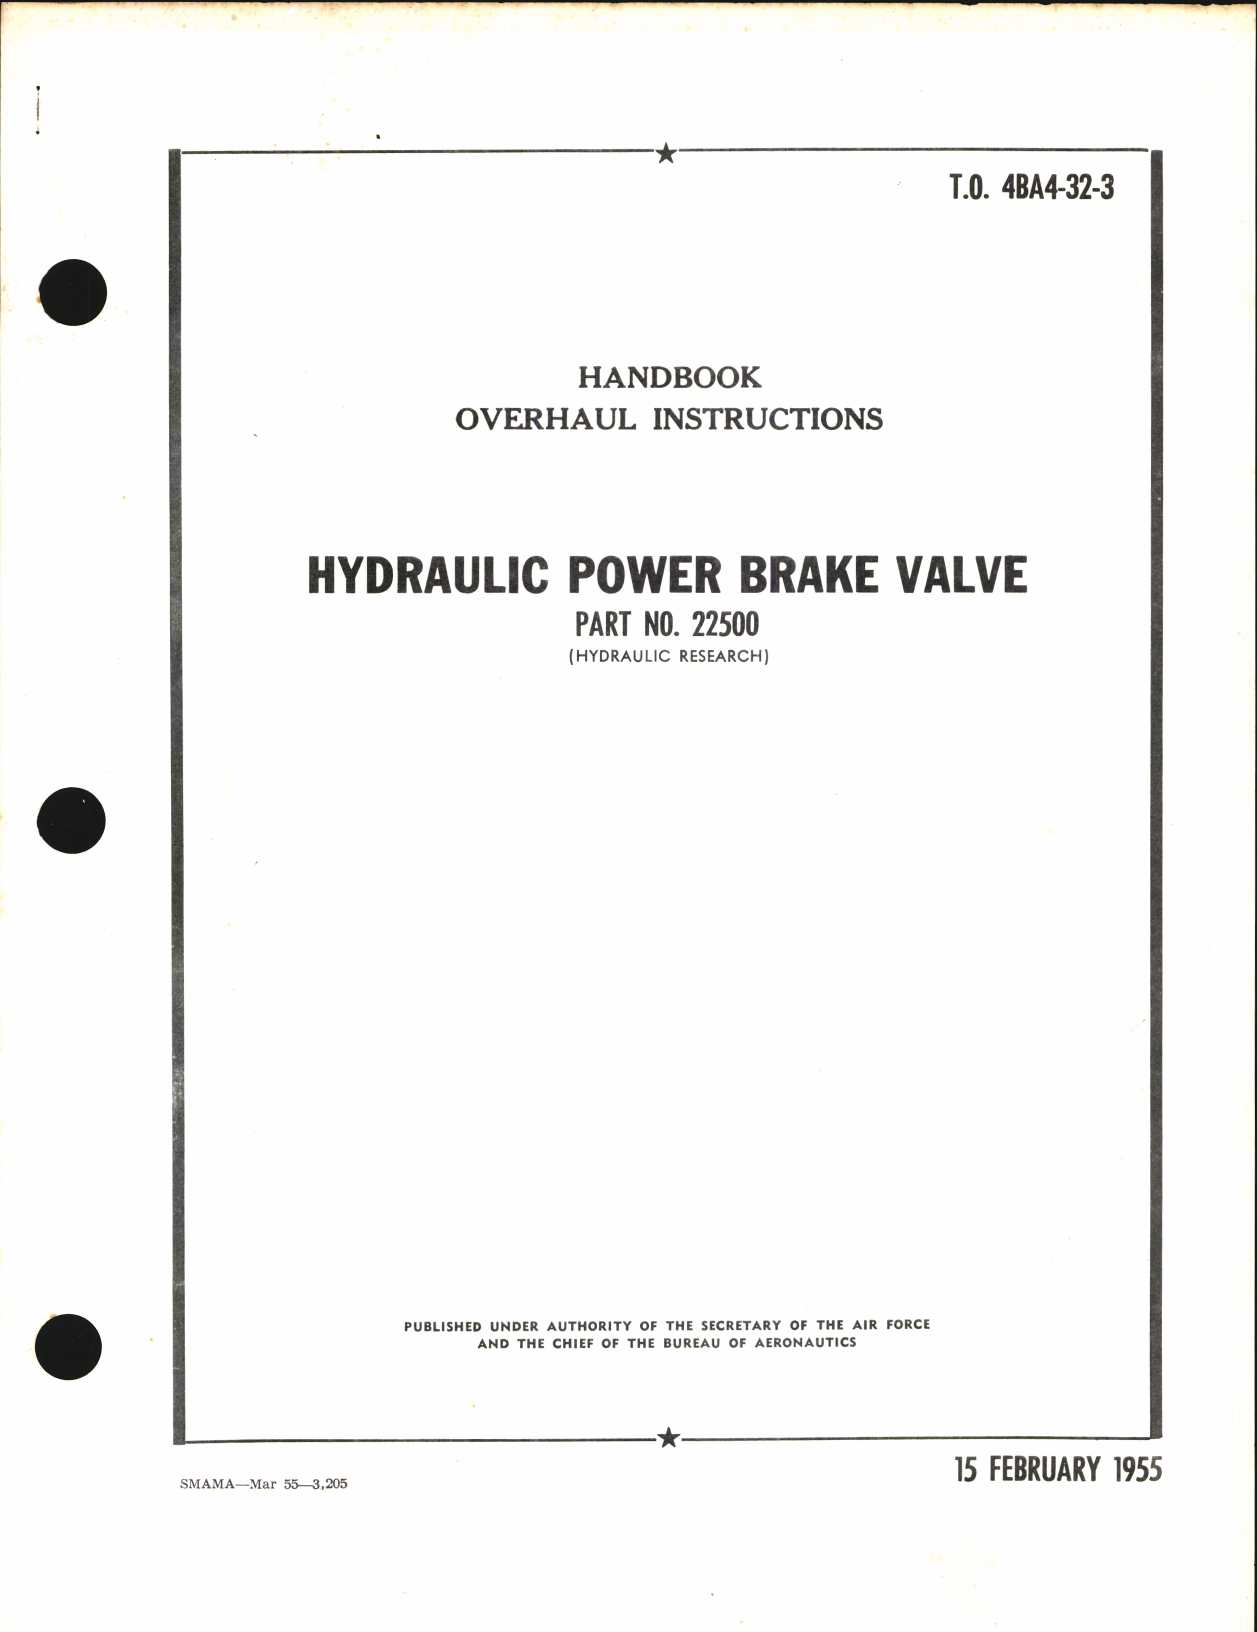 Sample page 1 from AirCorps Library document: Overhaul Instructions for Hydraulic Power Brake Valve